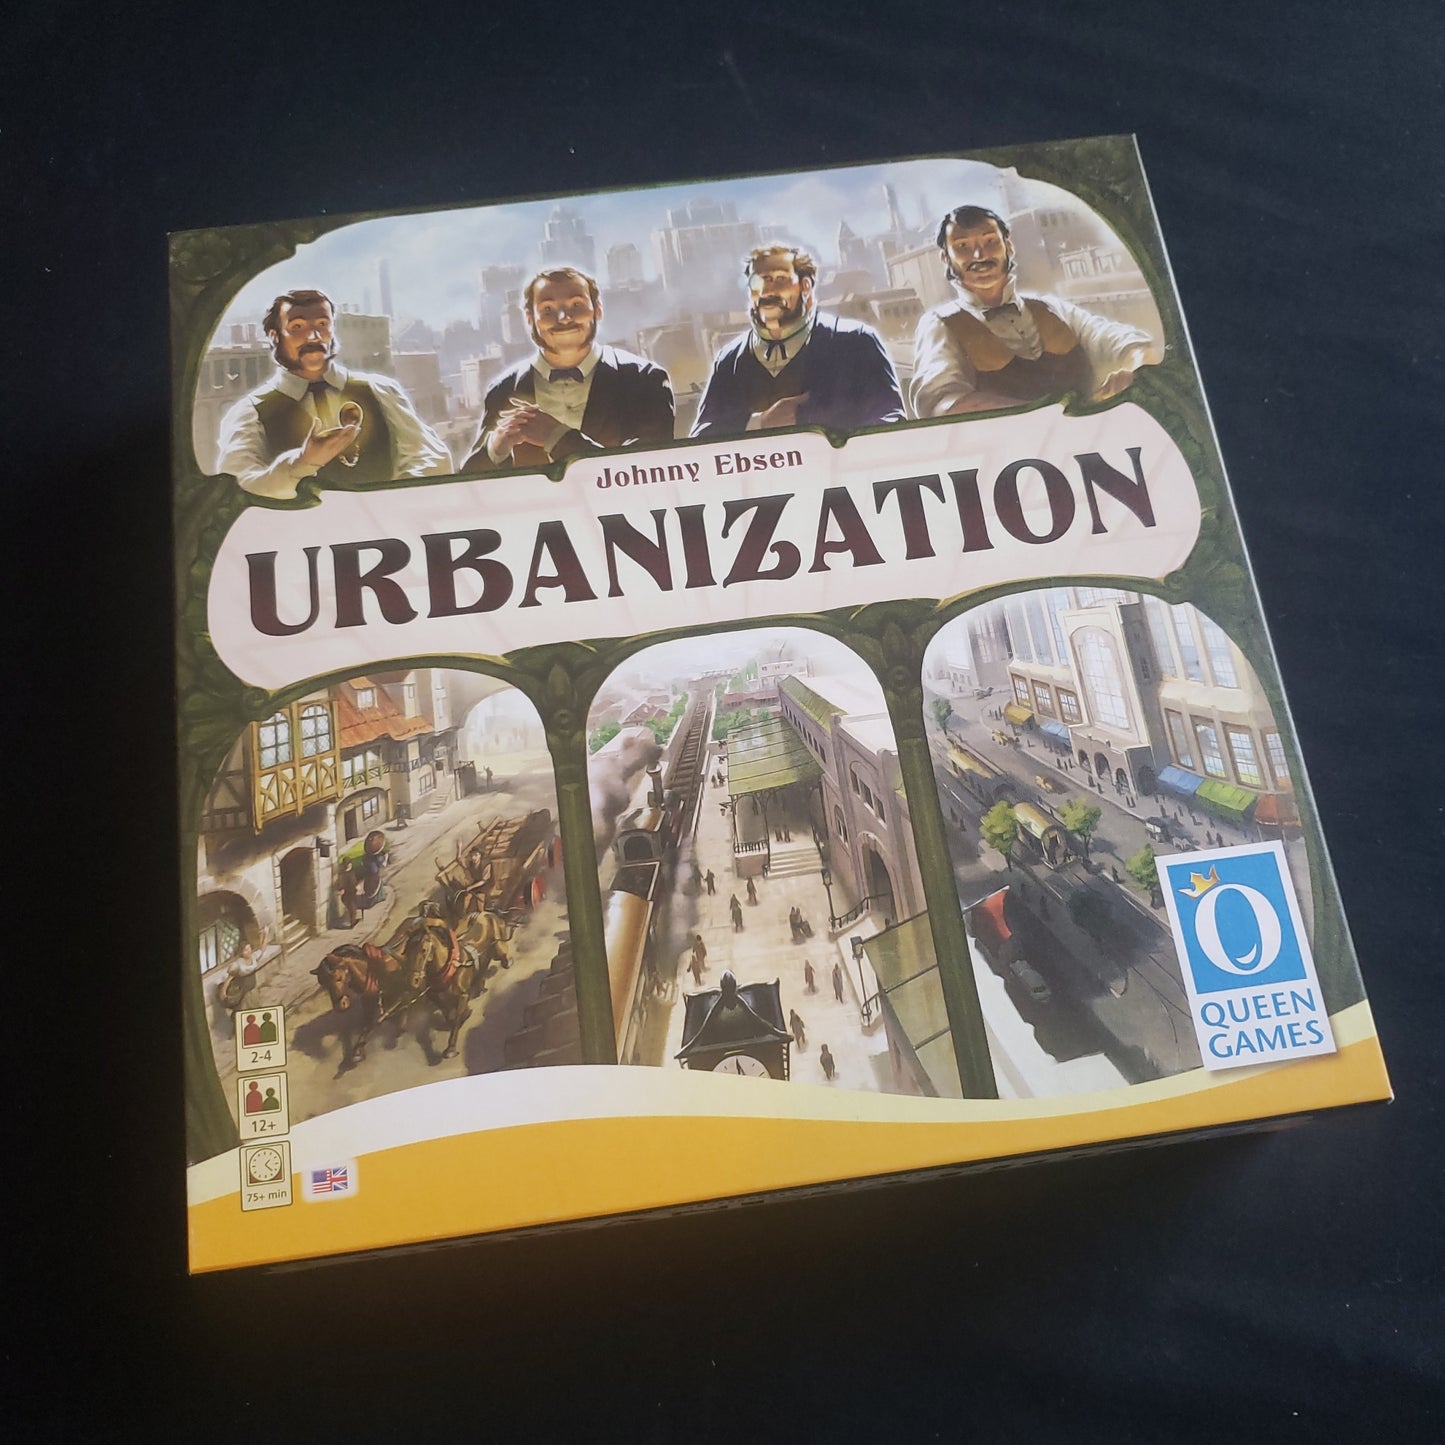 Image shows the front cover of the box of the Urbanization board game